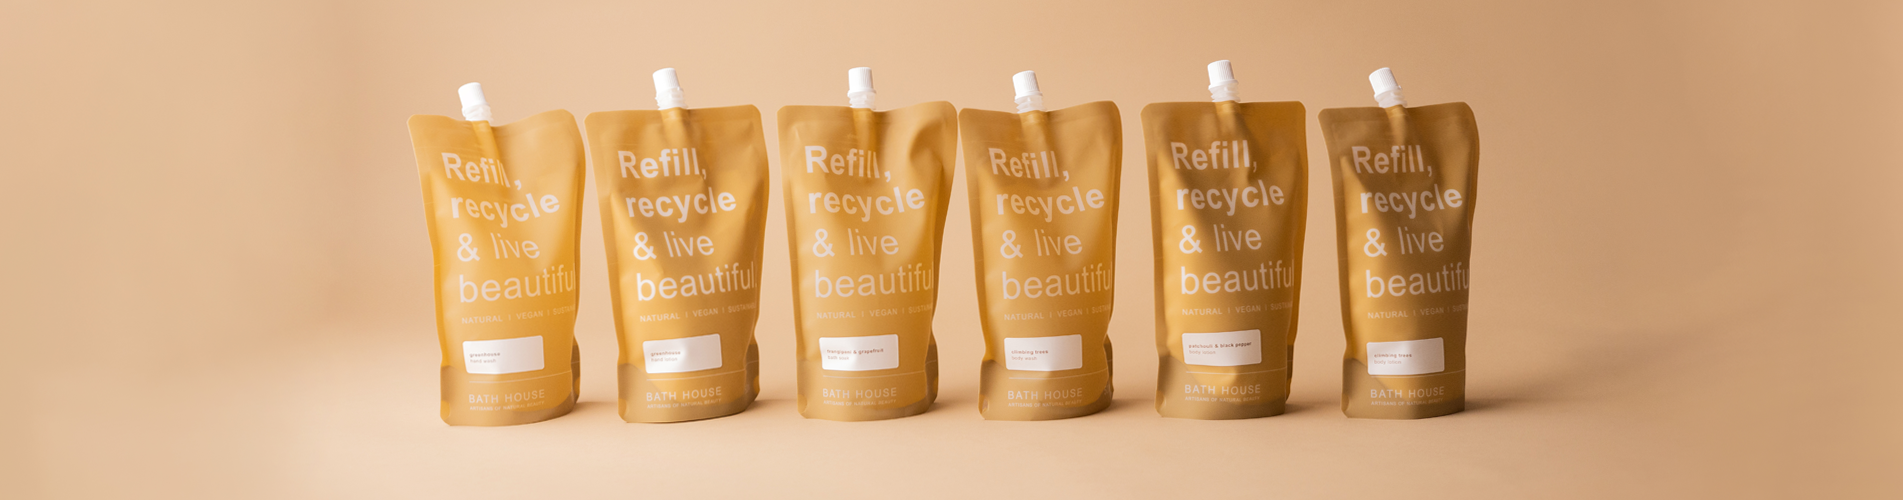 Banner Image Of The Refills Product Category